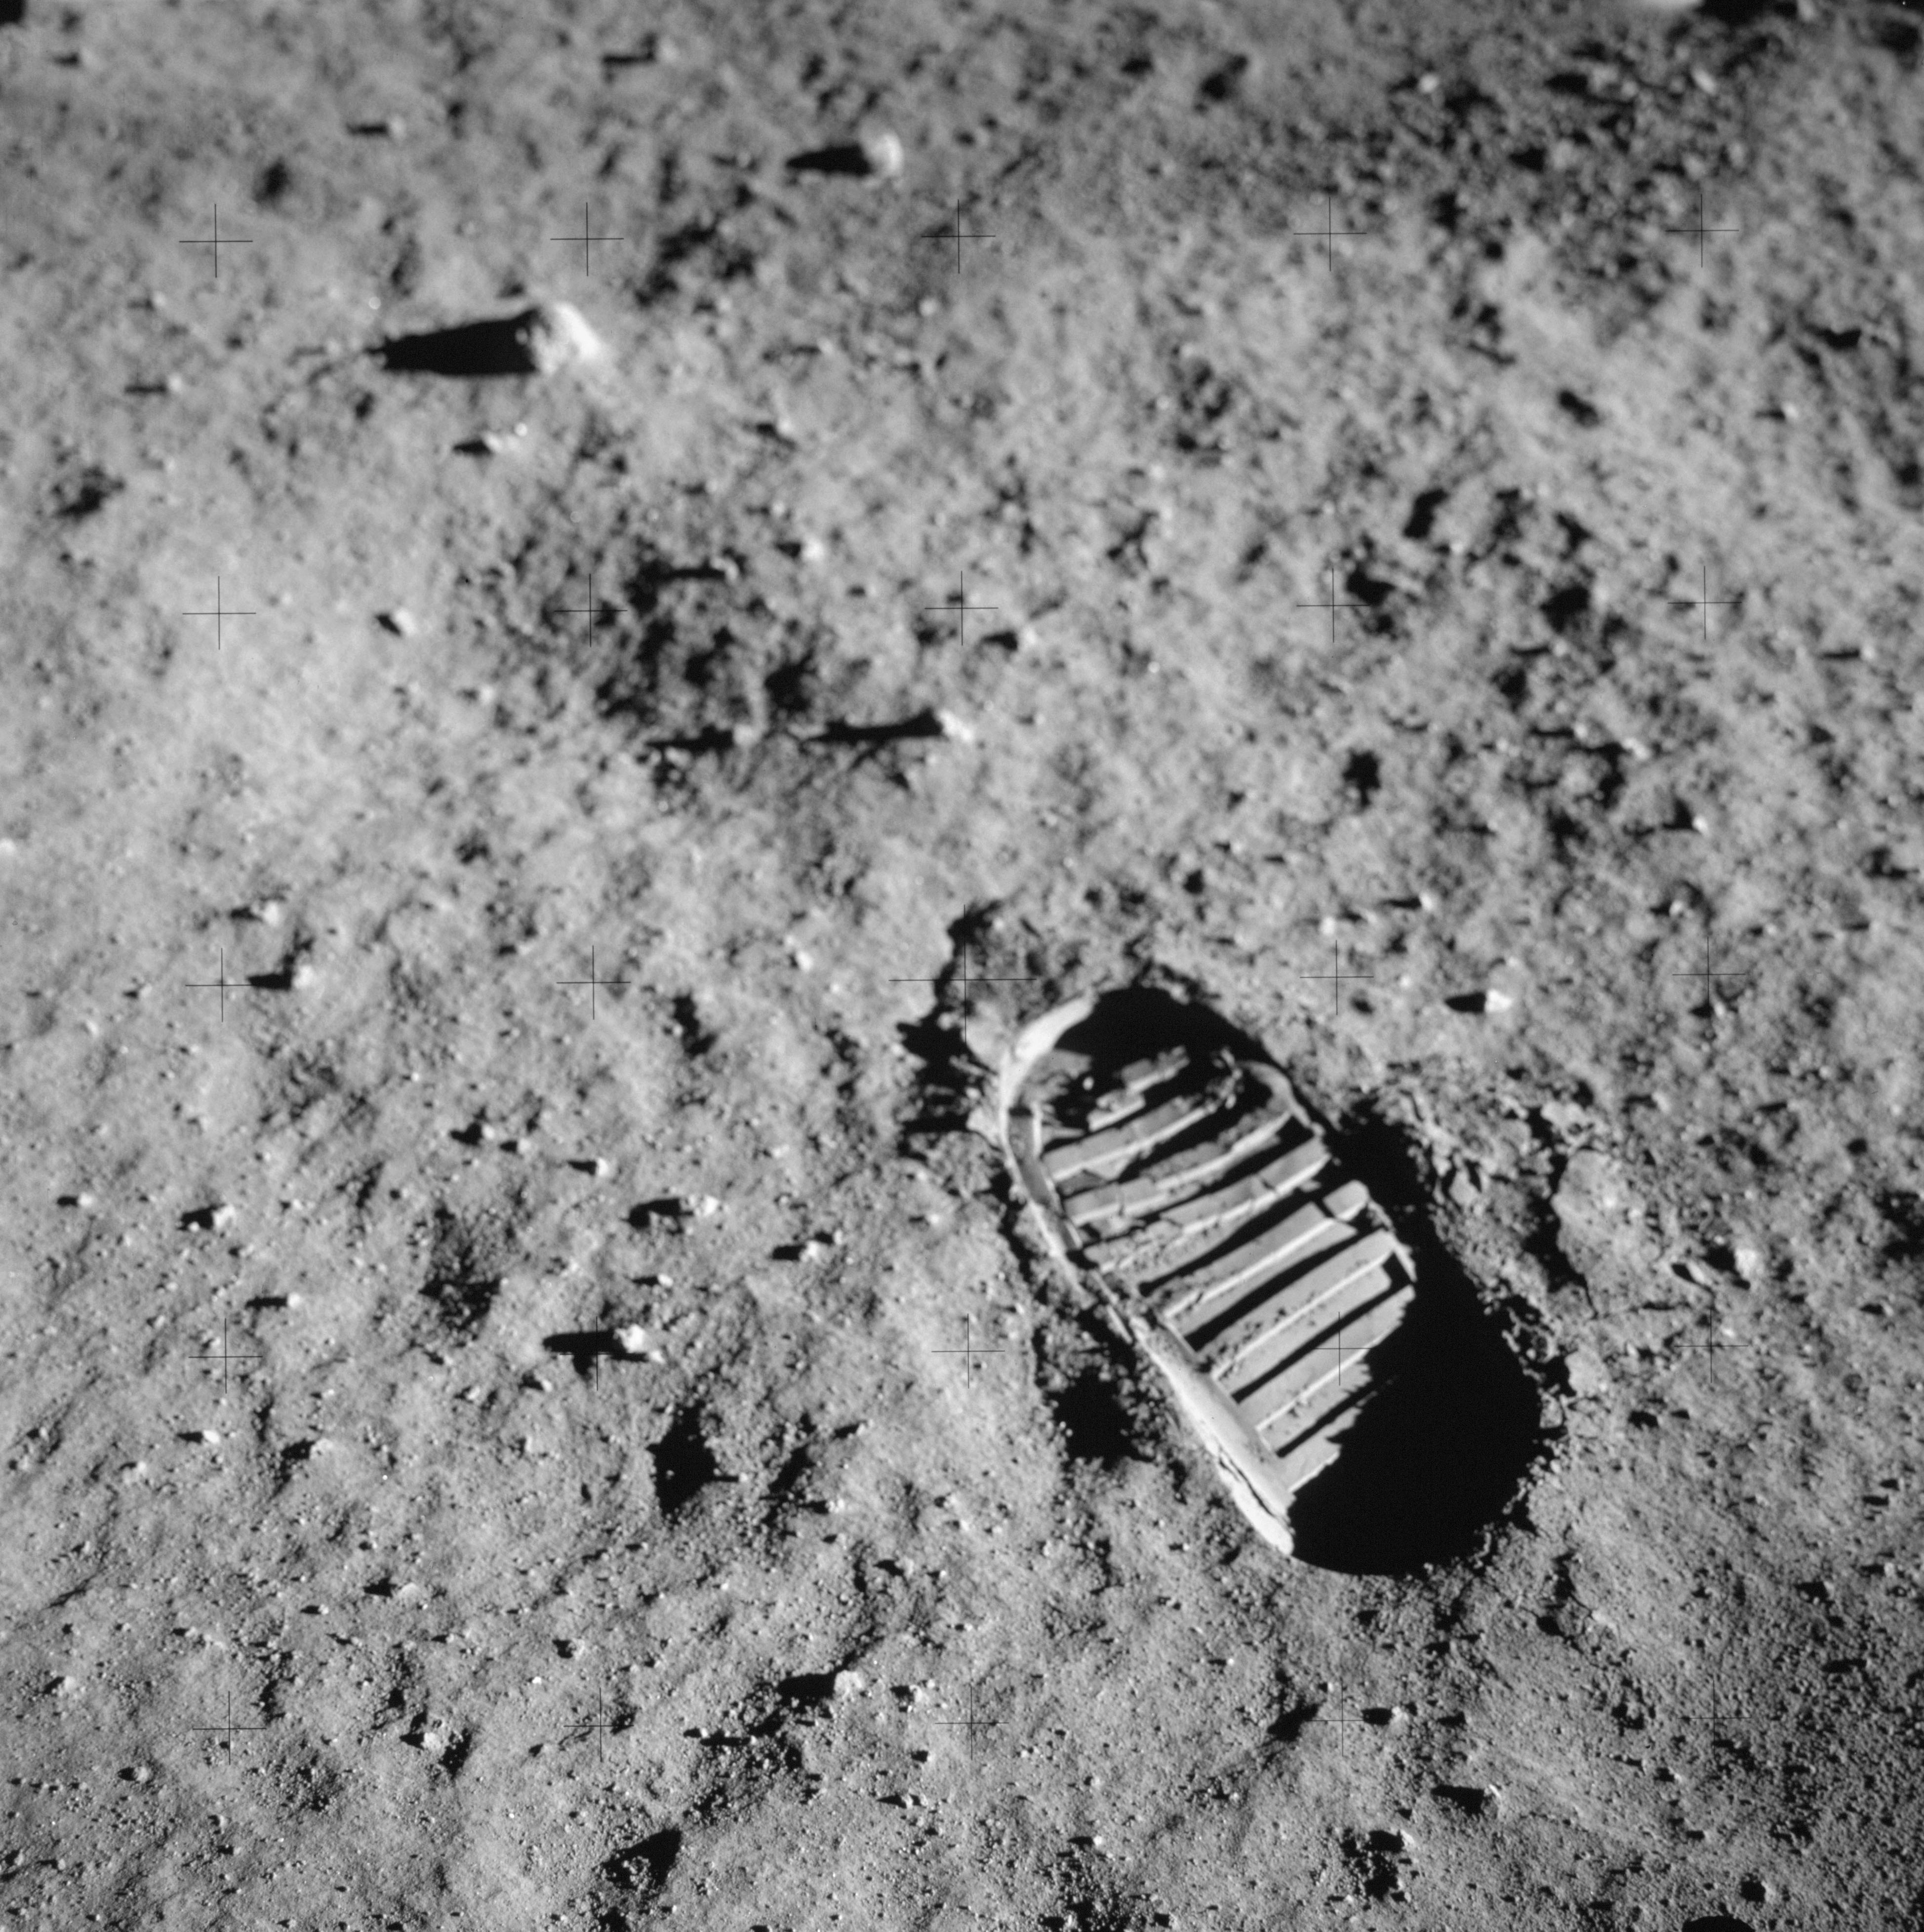 Often misidentified as Neil’s first footprint, it’s actually Buzz’s to test the lunar soil